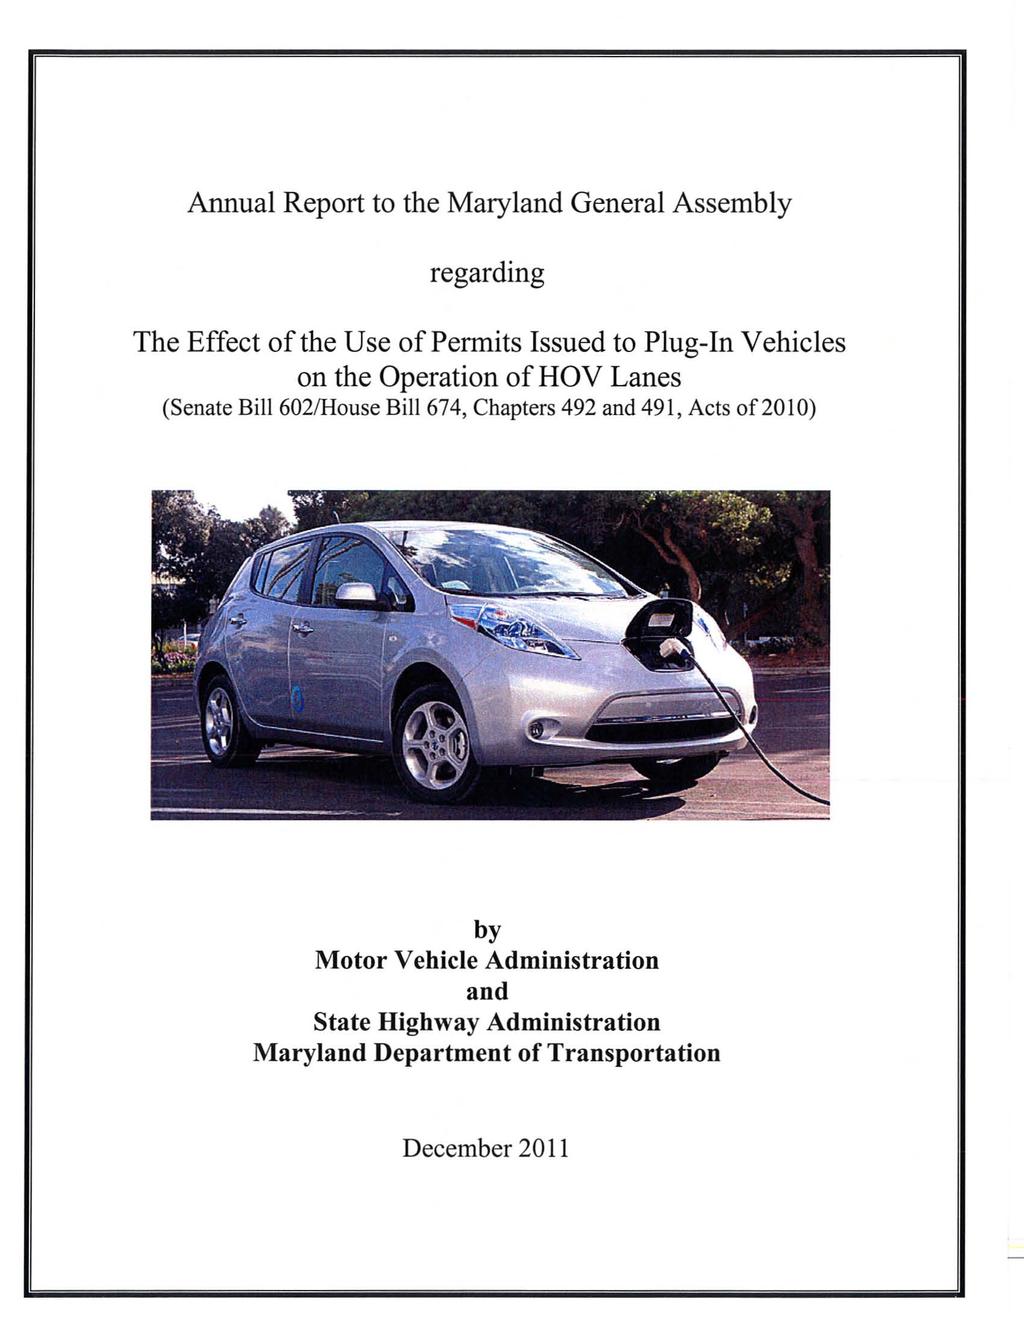 Annual Report to the Maryland General Assembly regarding The Effect of the Use of Permits Issued to Plug-In Vehicles on the Operation ofhov Lanes (Senate Bill